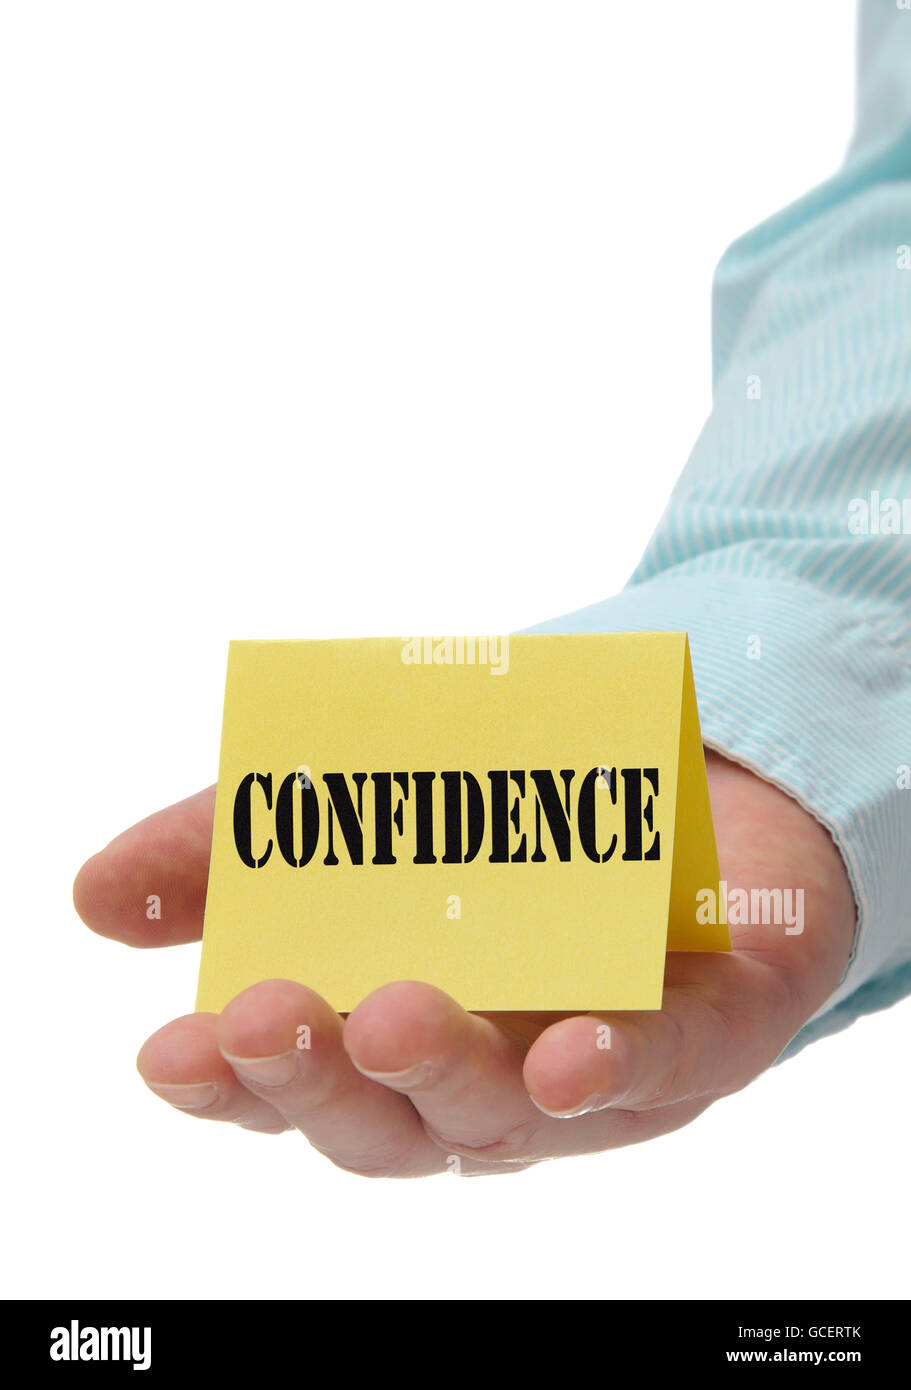 Business man holding yellow confidence sign on hand Stock Photo